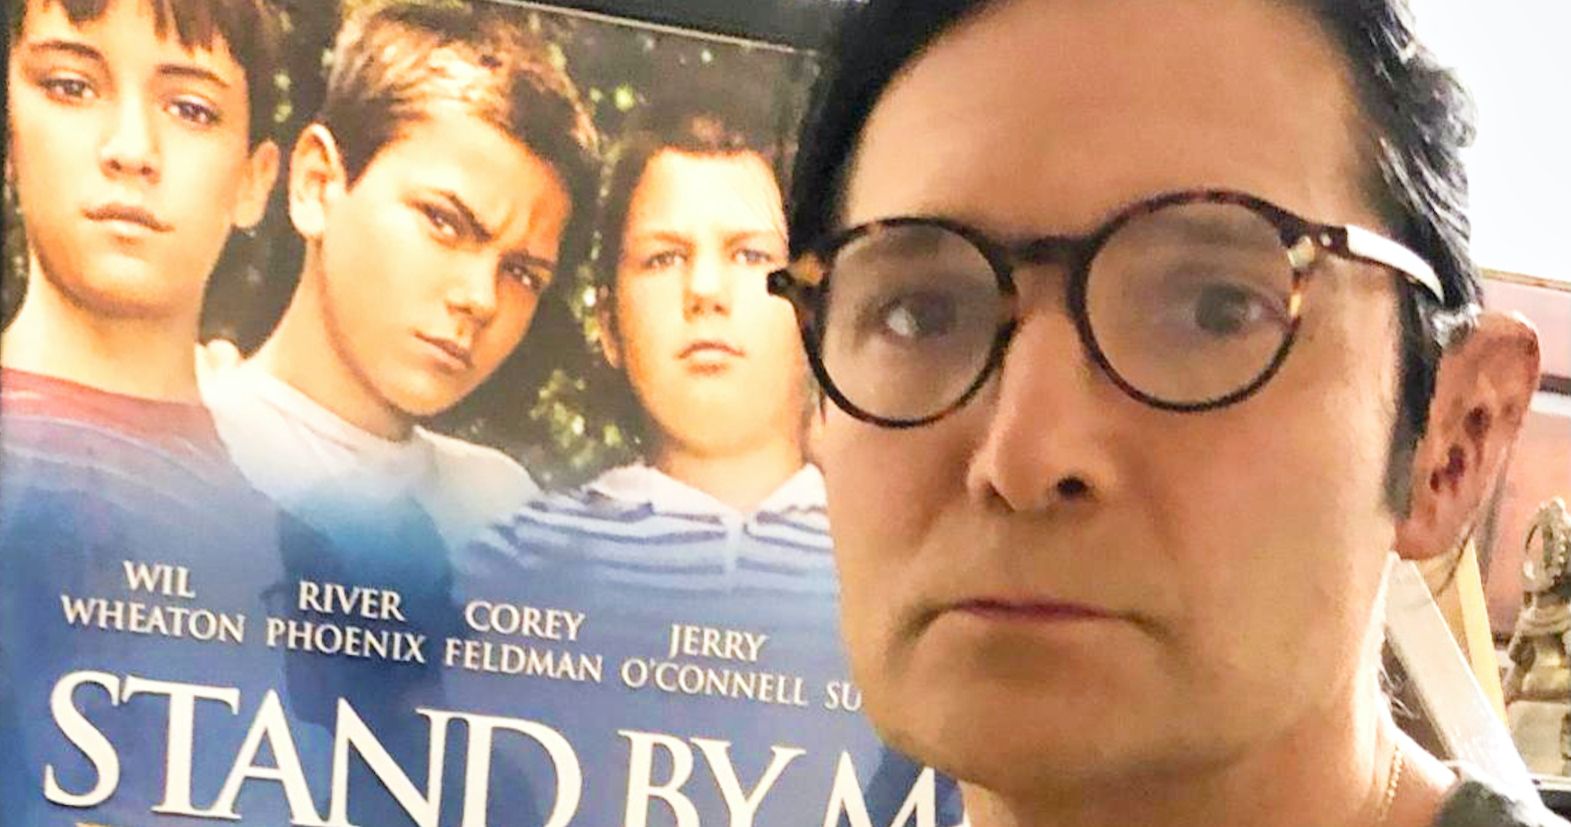 Corey Feldman to Auction Actual Prosthetic Ear Worn in Stand by Me as a Hybrid NFT